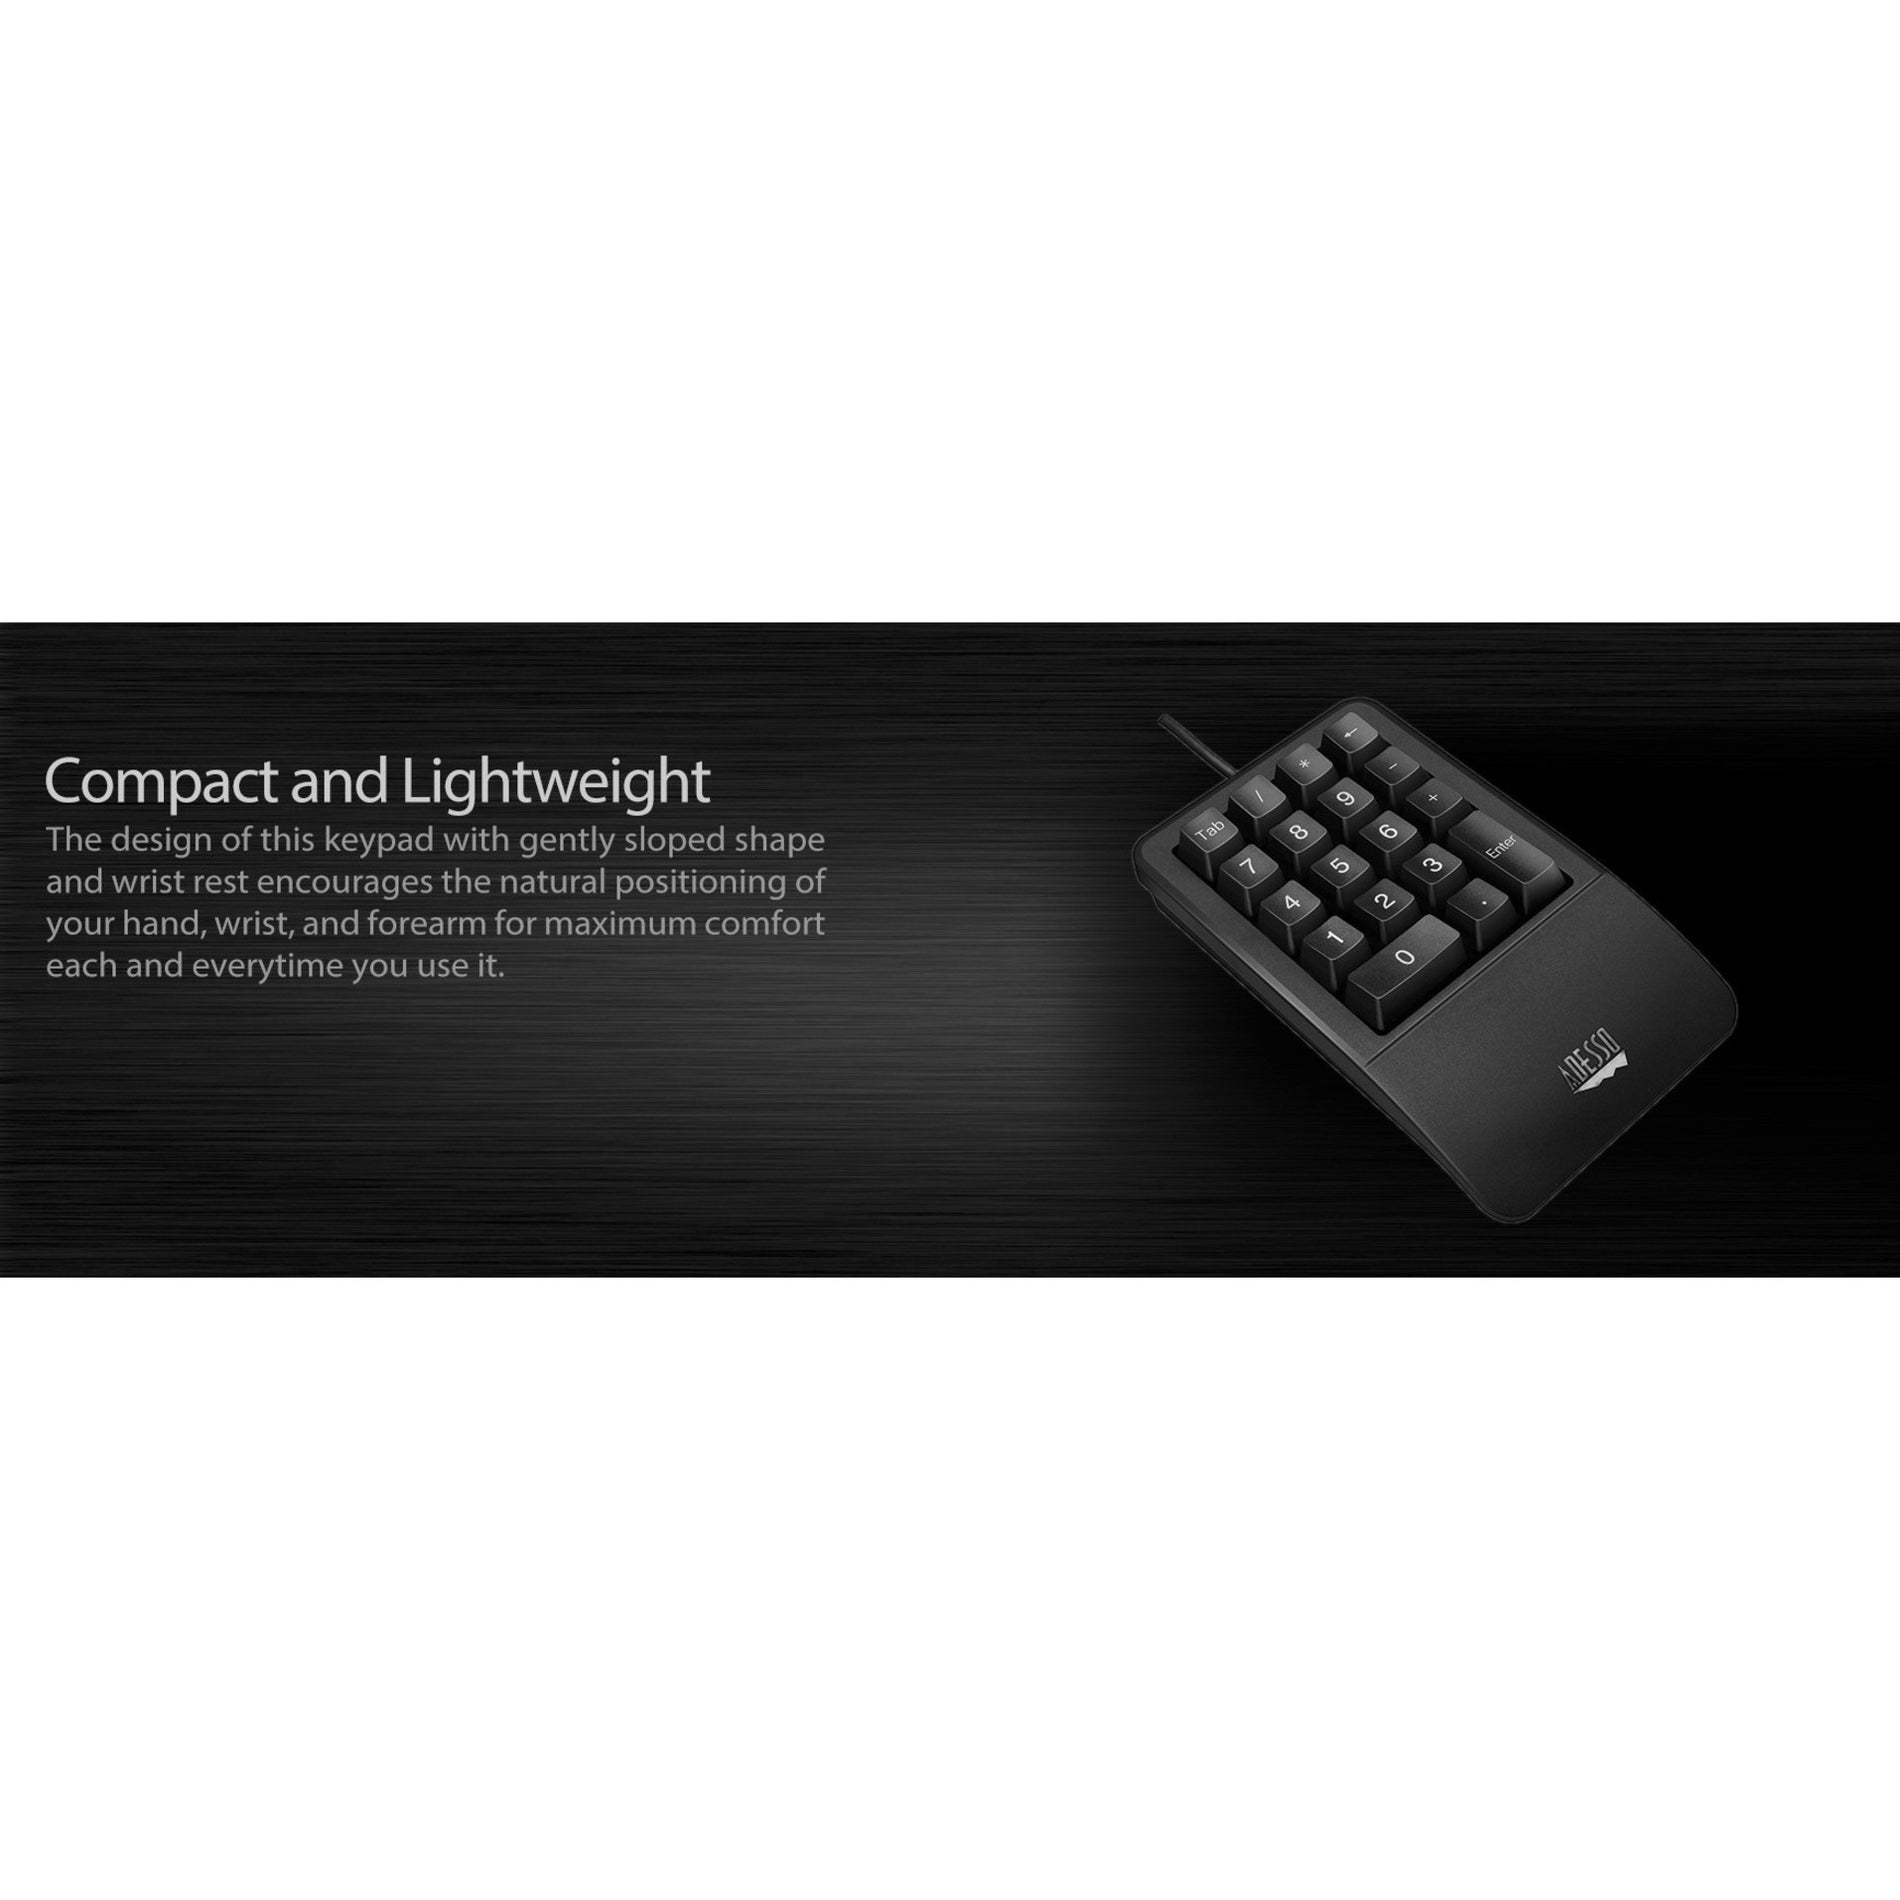 Adesso AKB-618UB Antimicrobial Waterproof Numeric Keypad with Wrist Rest Support, Ergonomic Design, Spill Proof, and Quiet Keys